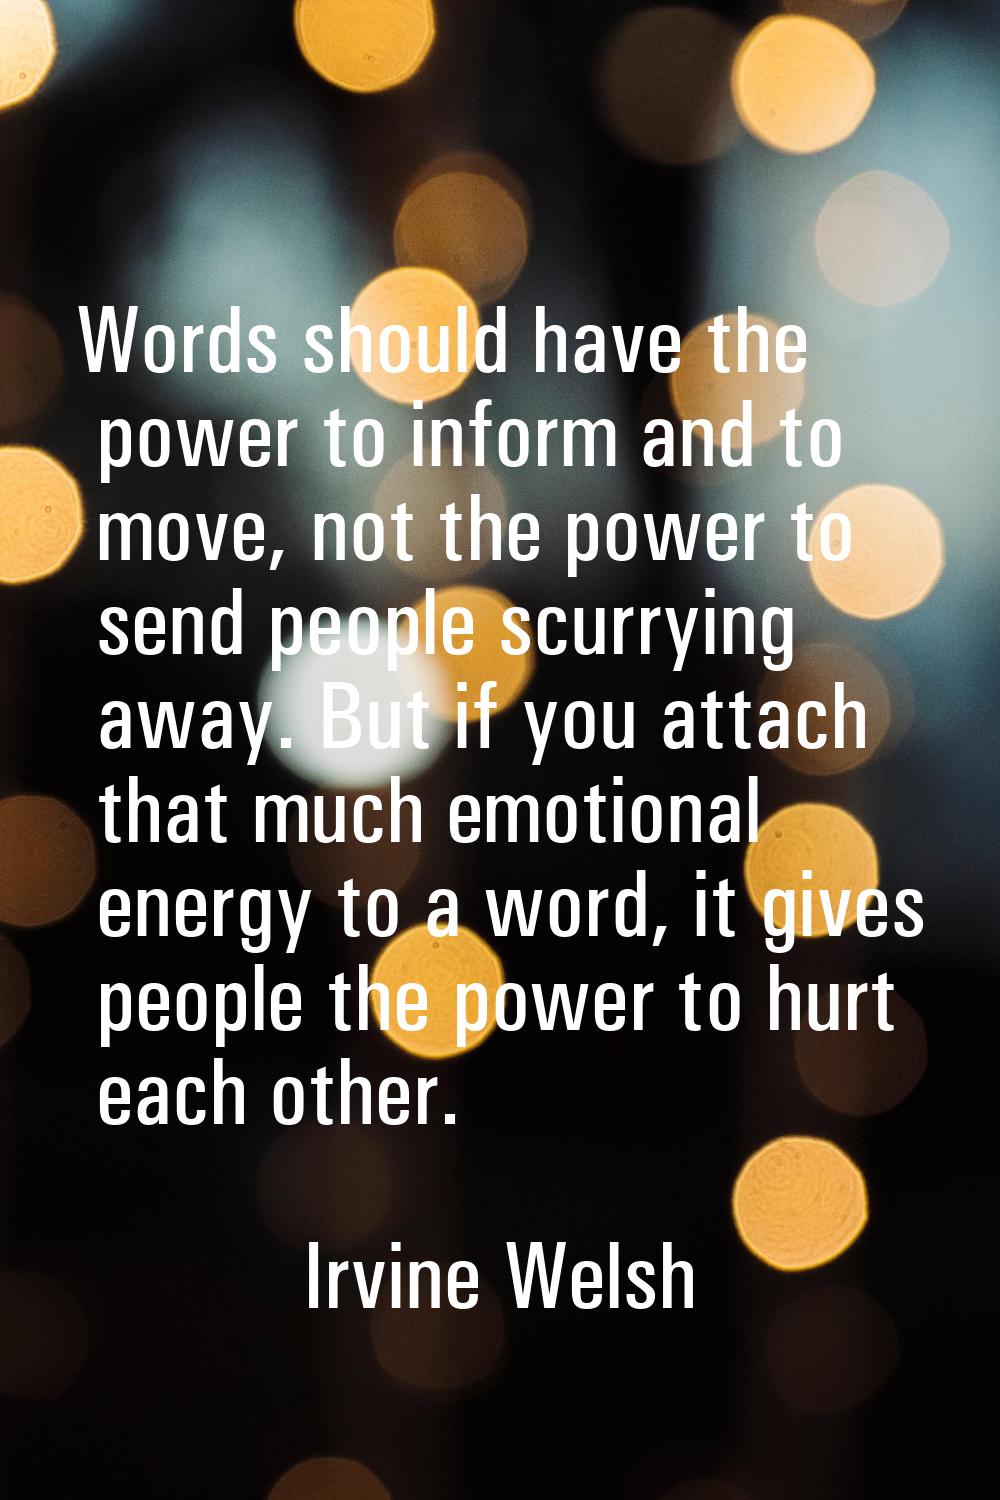 Words should have the power to inform and to move, not the power to send people scurrying away. But